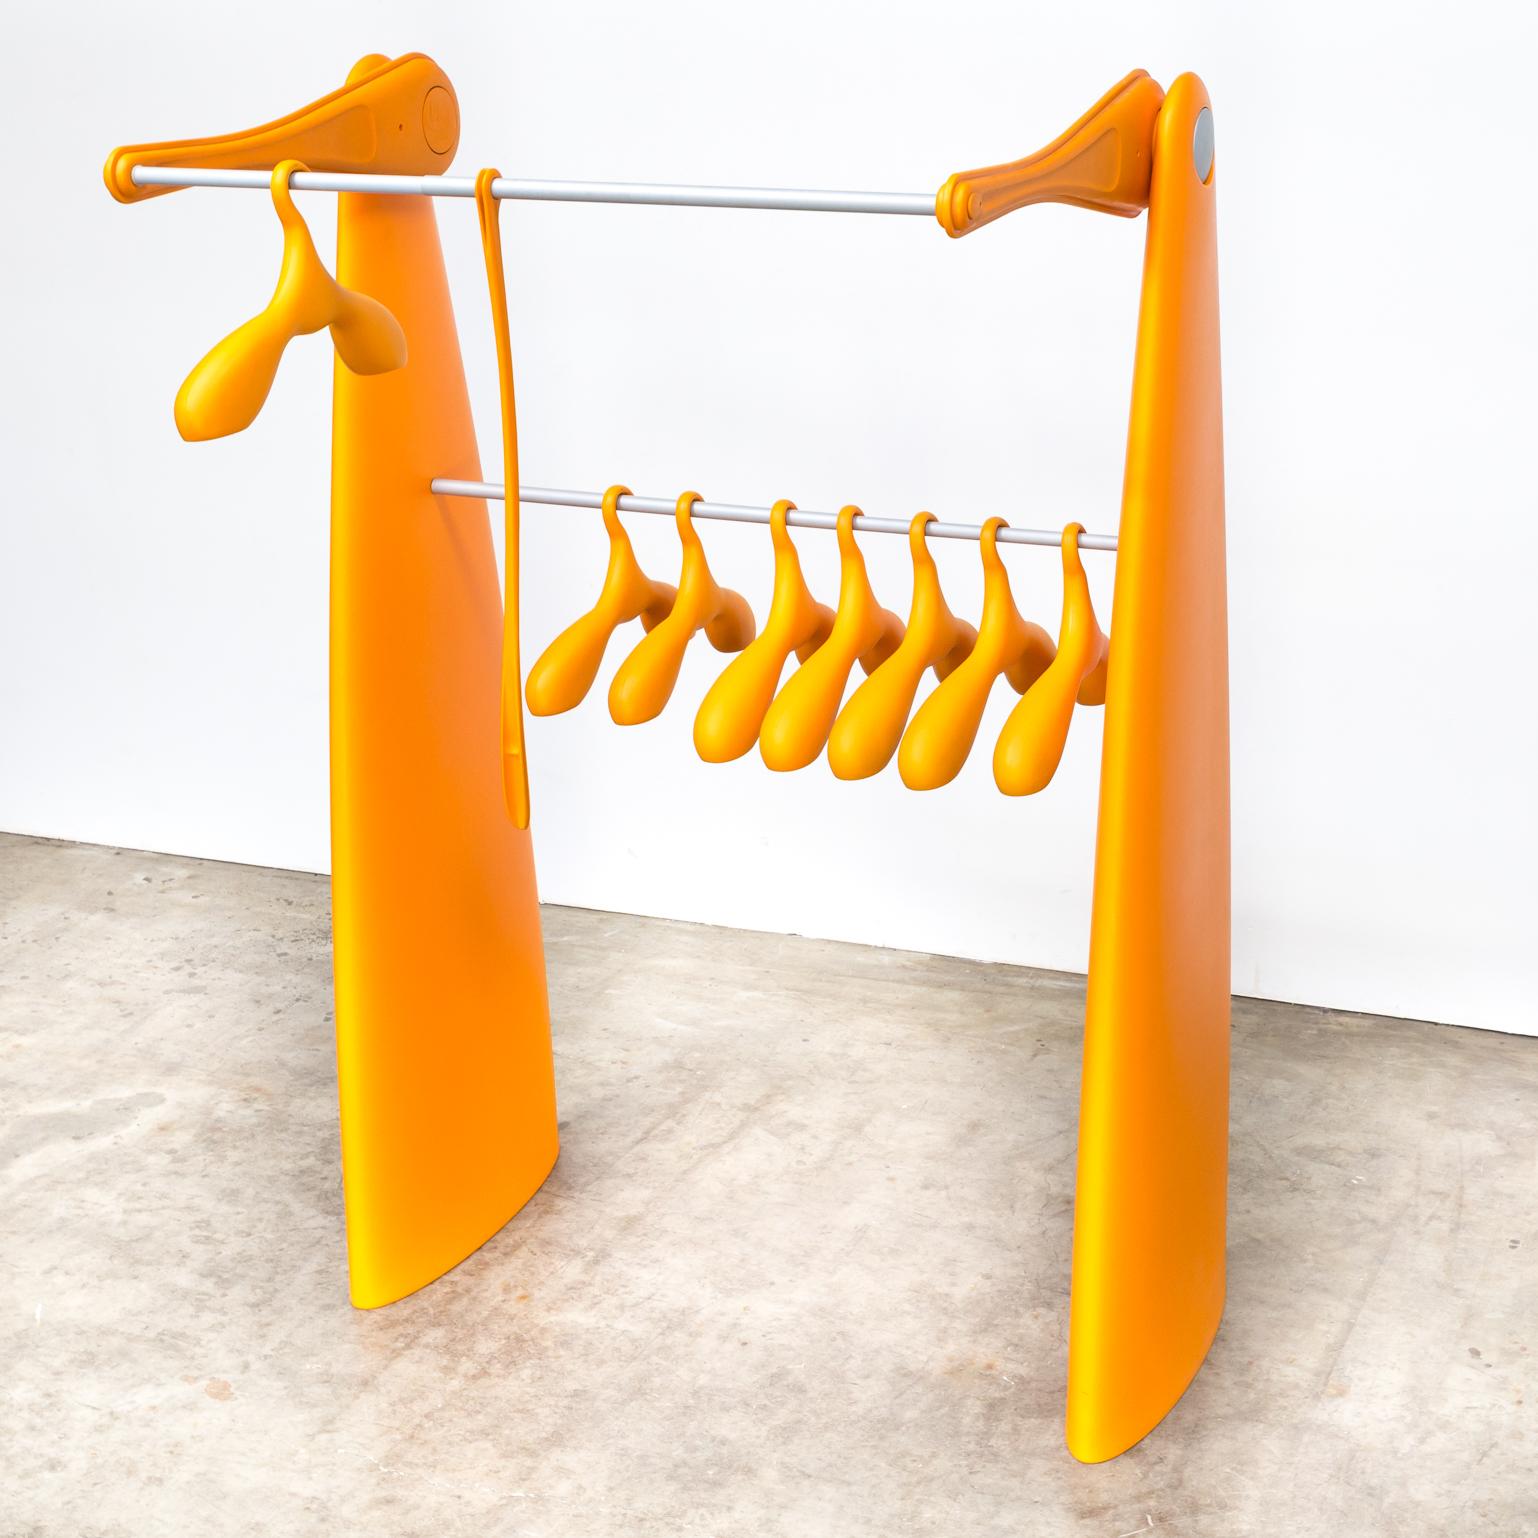 E. Terragni Coat Stand ‘Atelier’ & Servetto Lift and Dino Clothes Hangers im Angebot 5